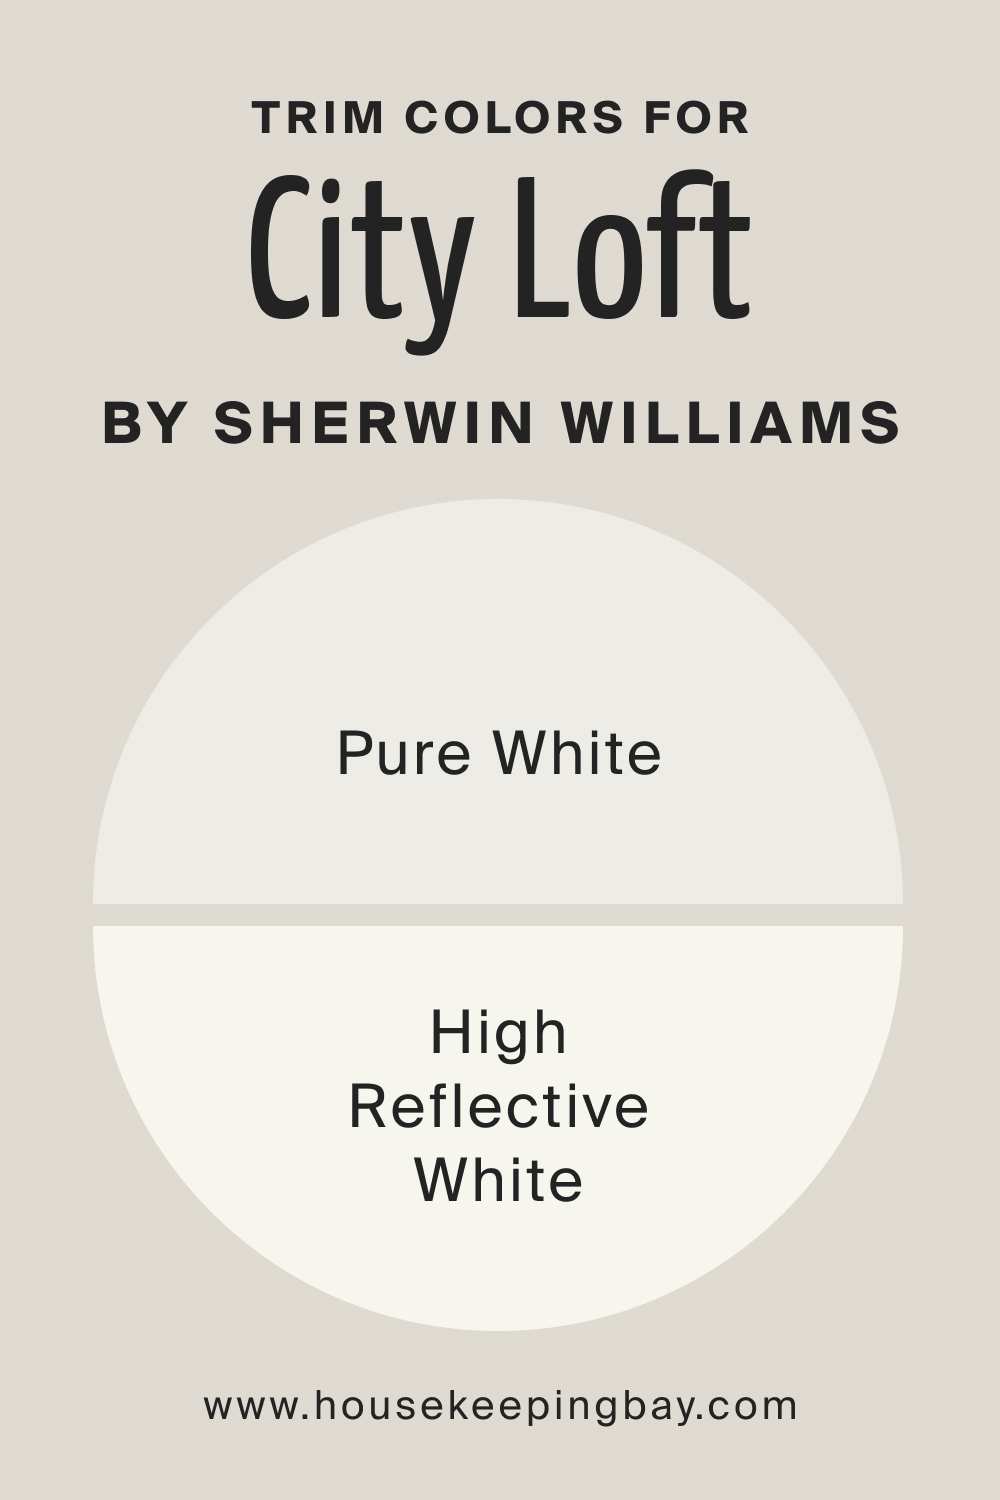 Trim Colors for City Loft SW 7631 by Sherwin Williams